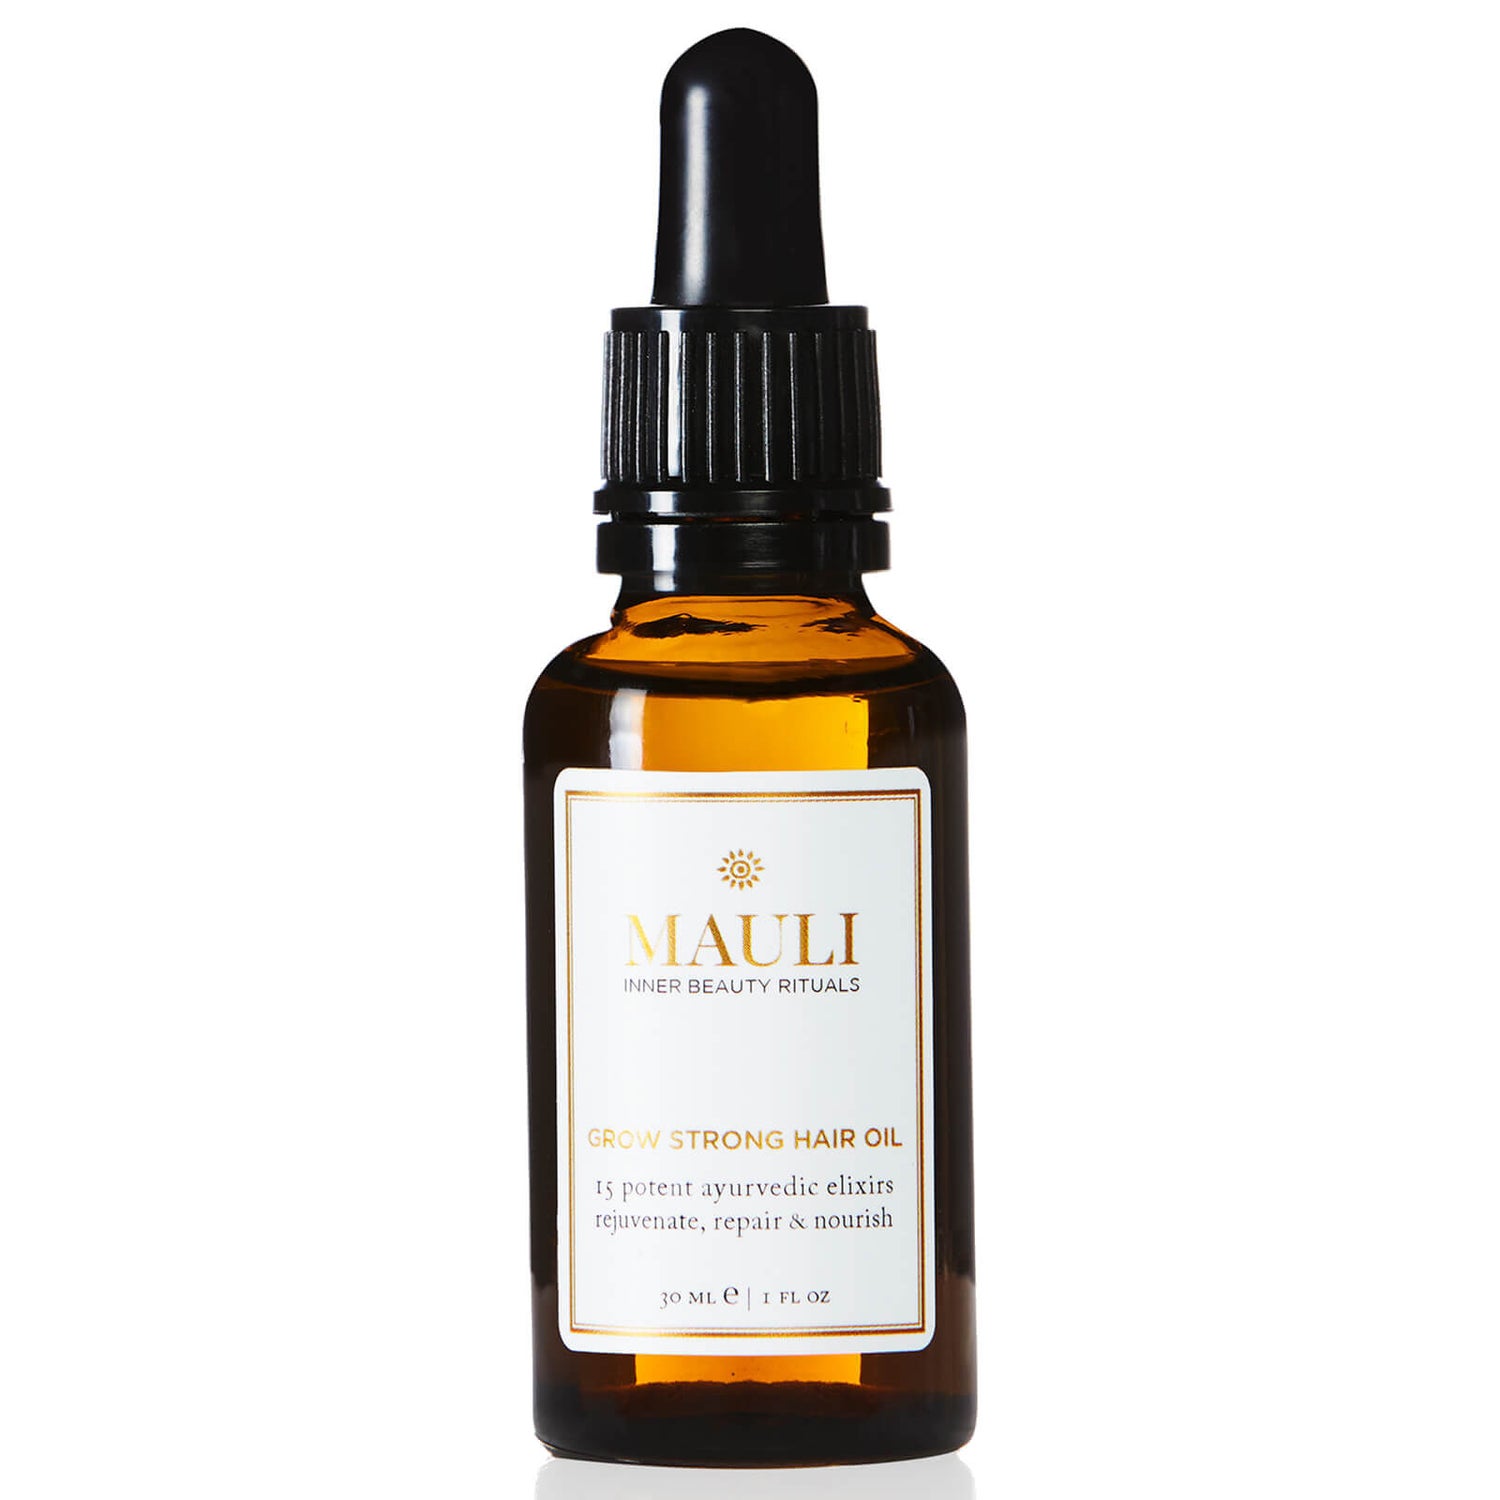 Mauli Grow Strong Hair Oil 30ml - FREE Delivery